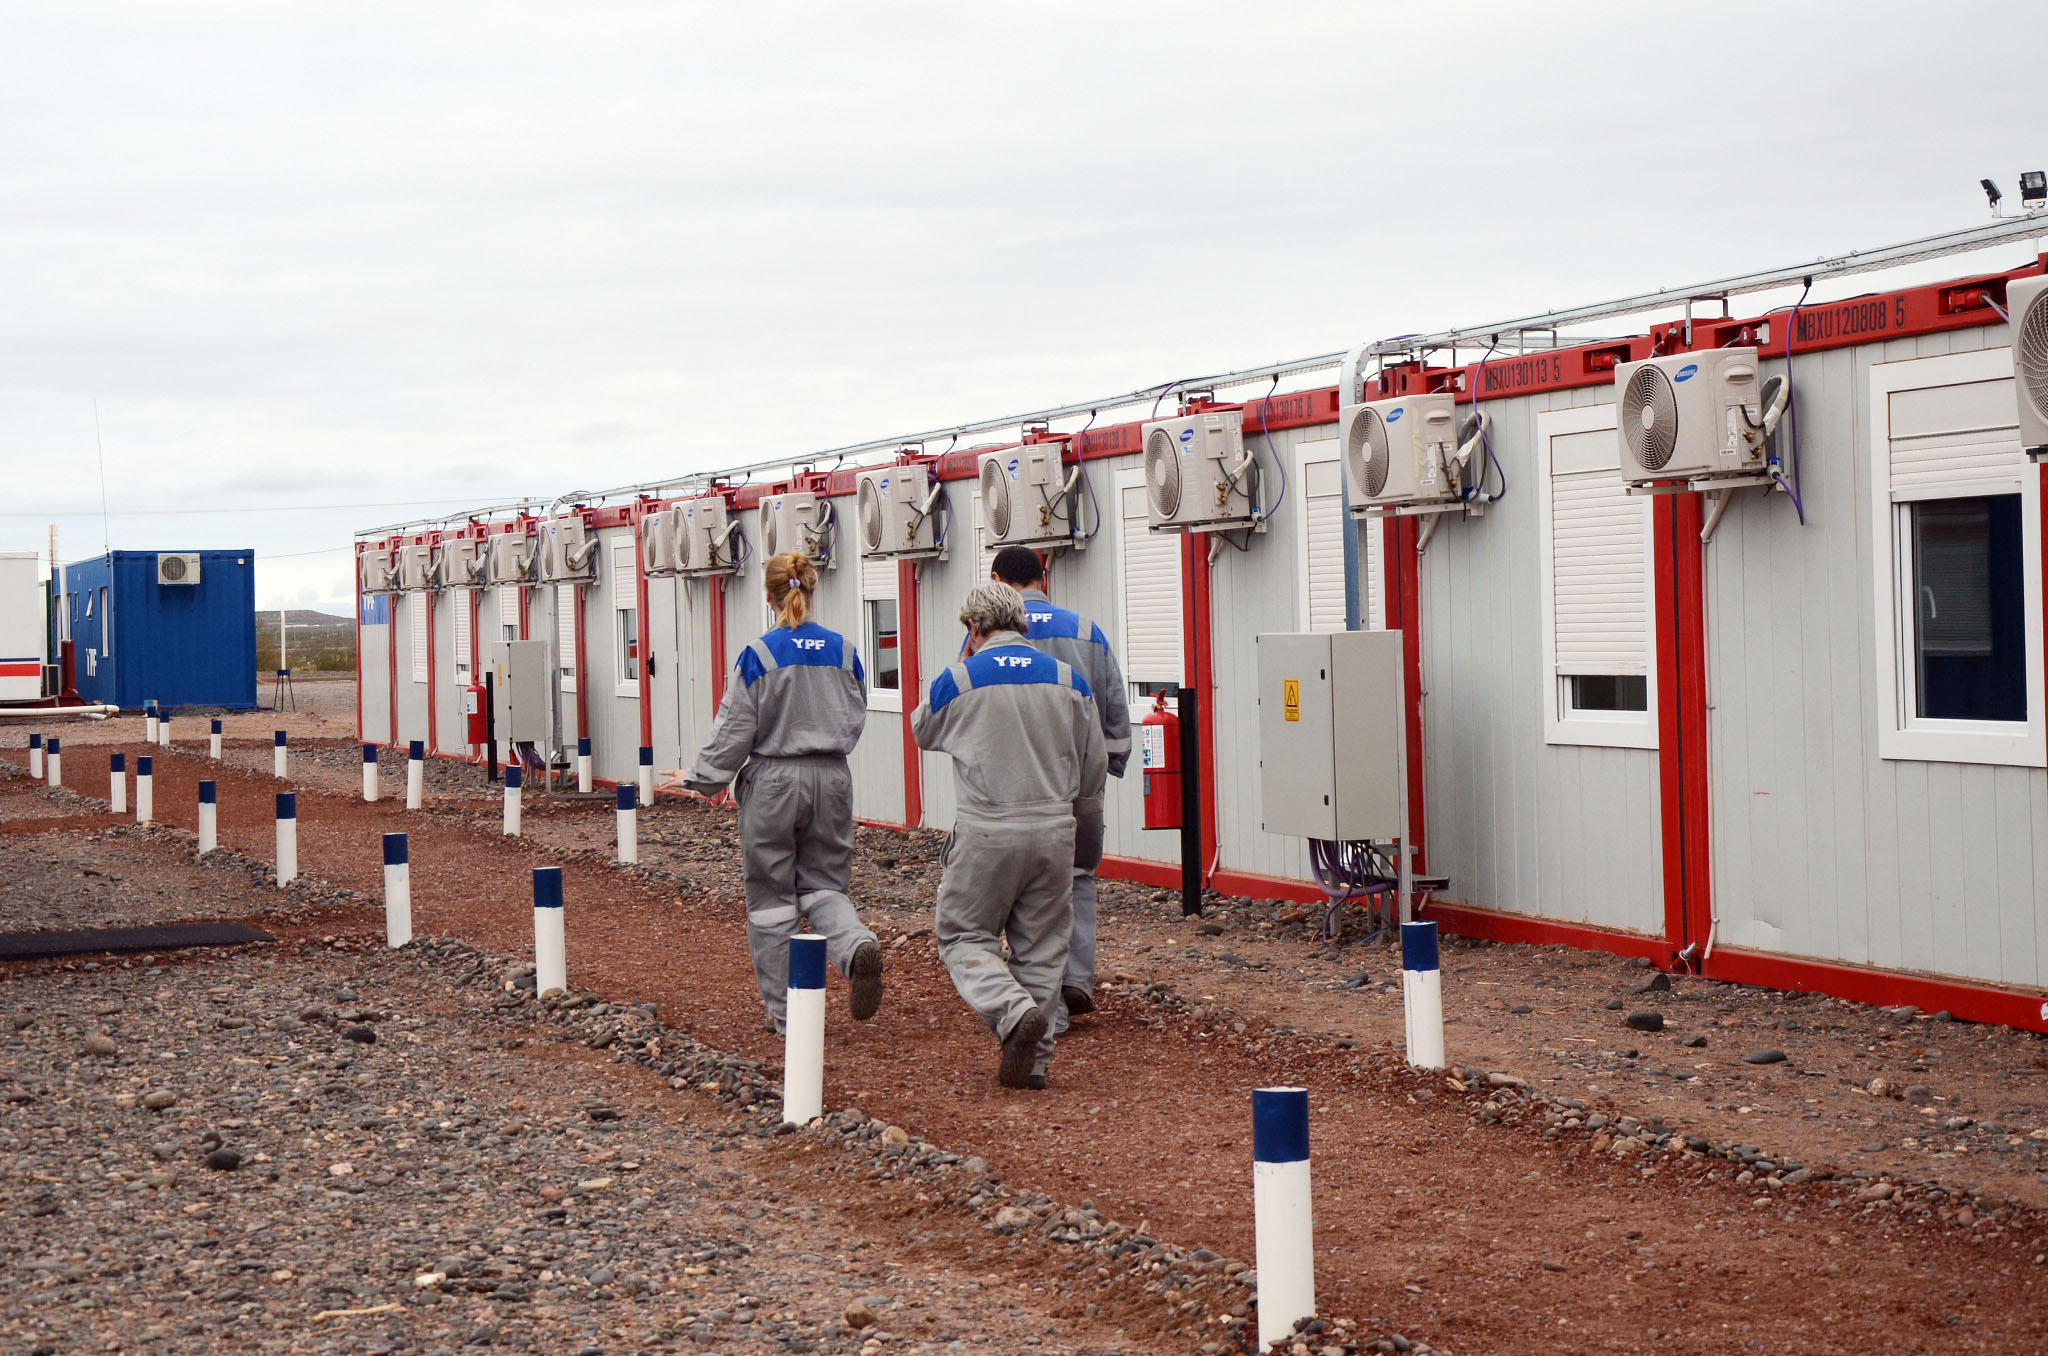 FIFO workers in uniform walk down a dirt path next to a portable modular structure.